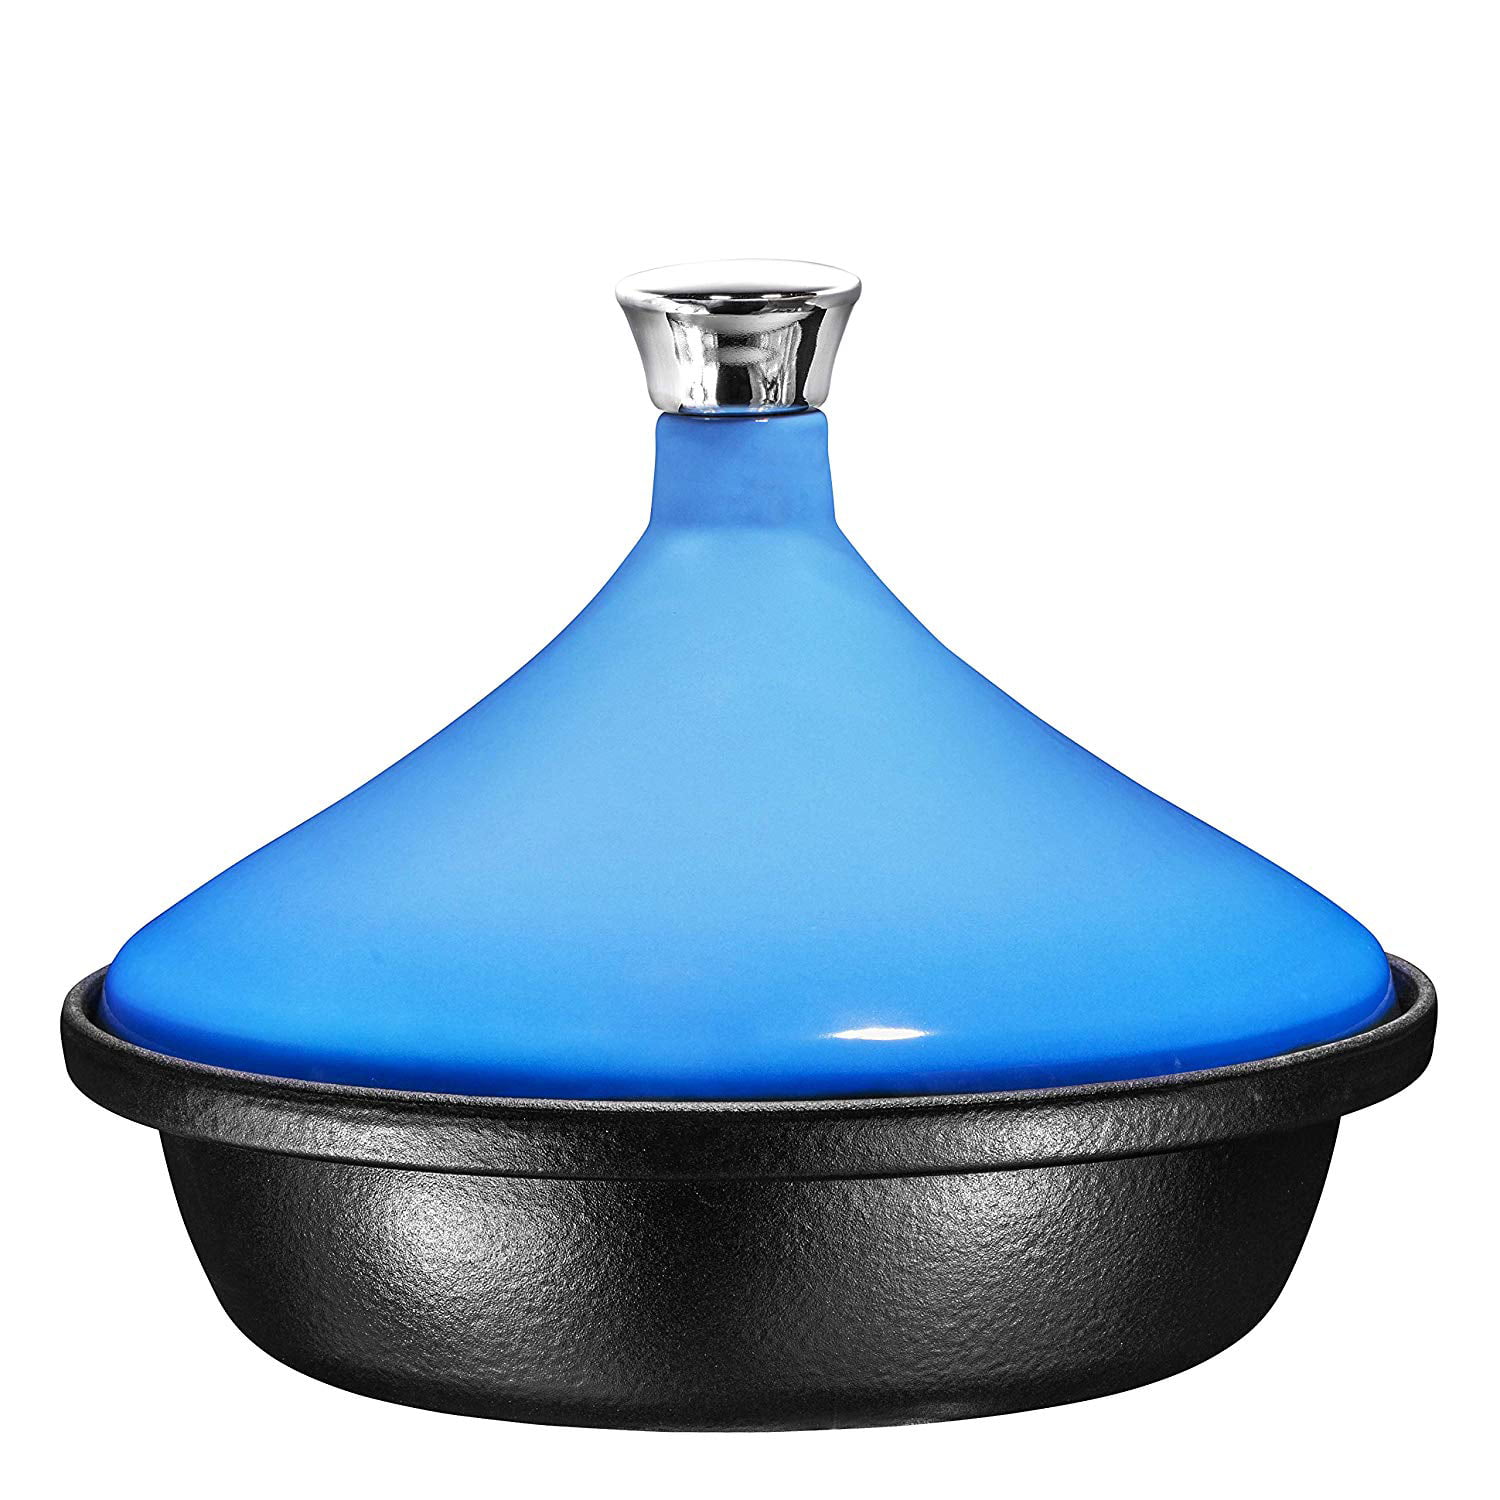 Colorful,Blue Cast Iron Tagine Pot Enameled Cast Iron Tangine with Lid for Different Cooking Styles and Temperature Settings